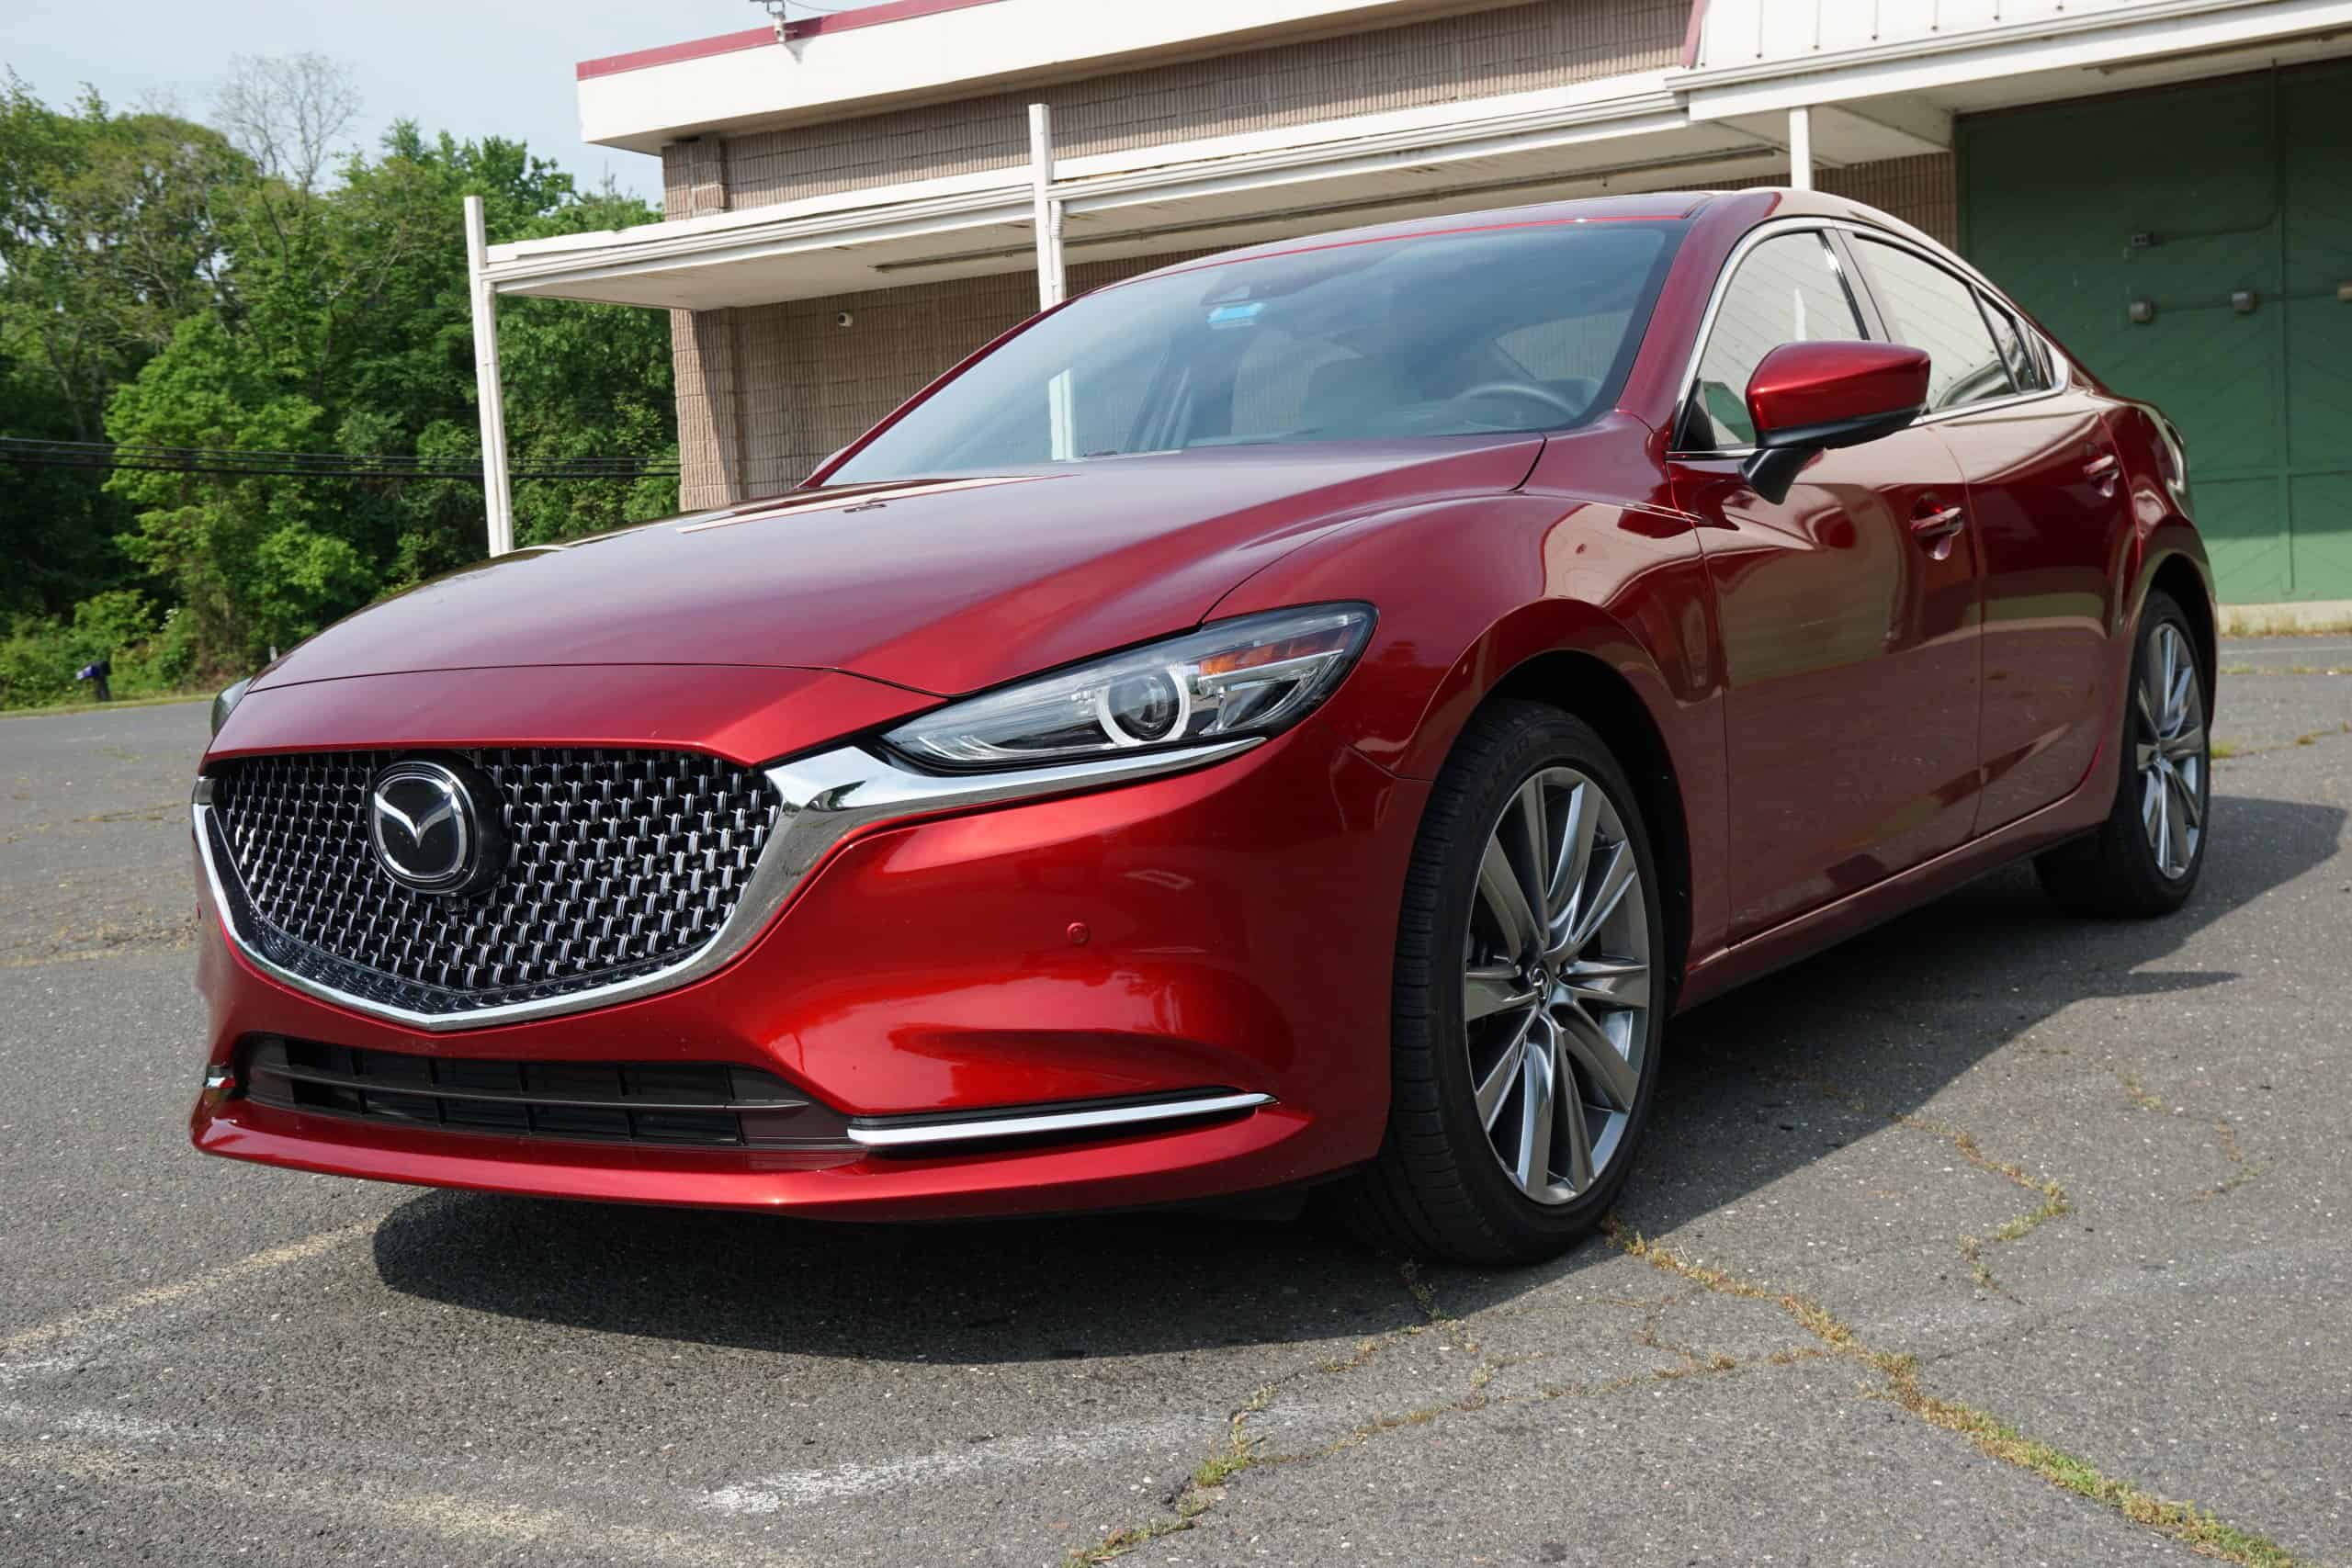 Driven: 2020 Mazda 6 is a roomy and sporty sedan